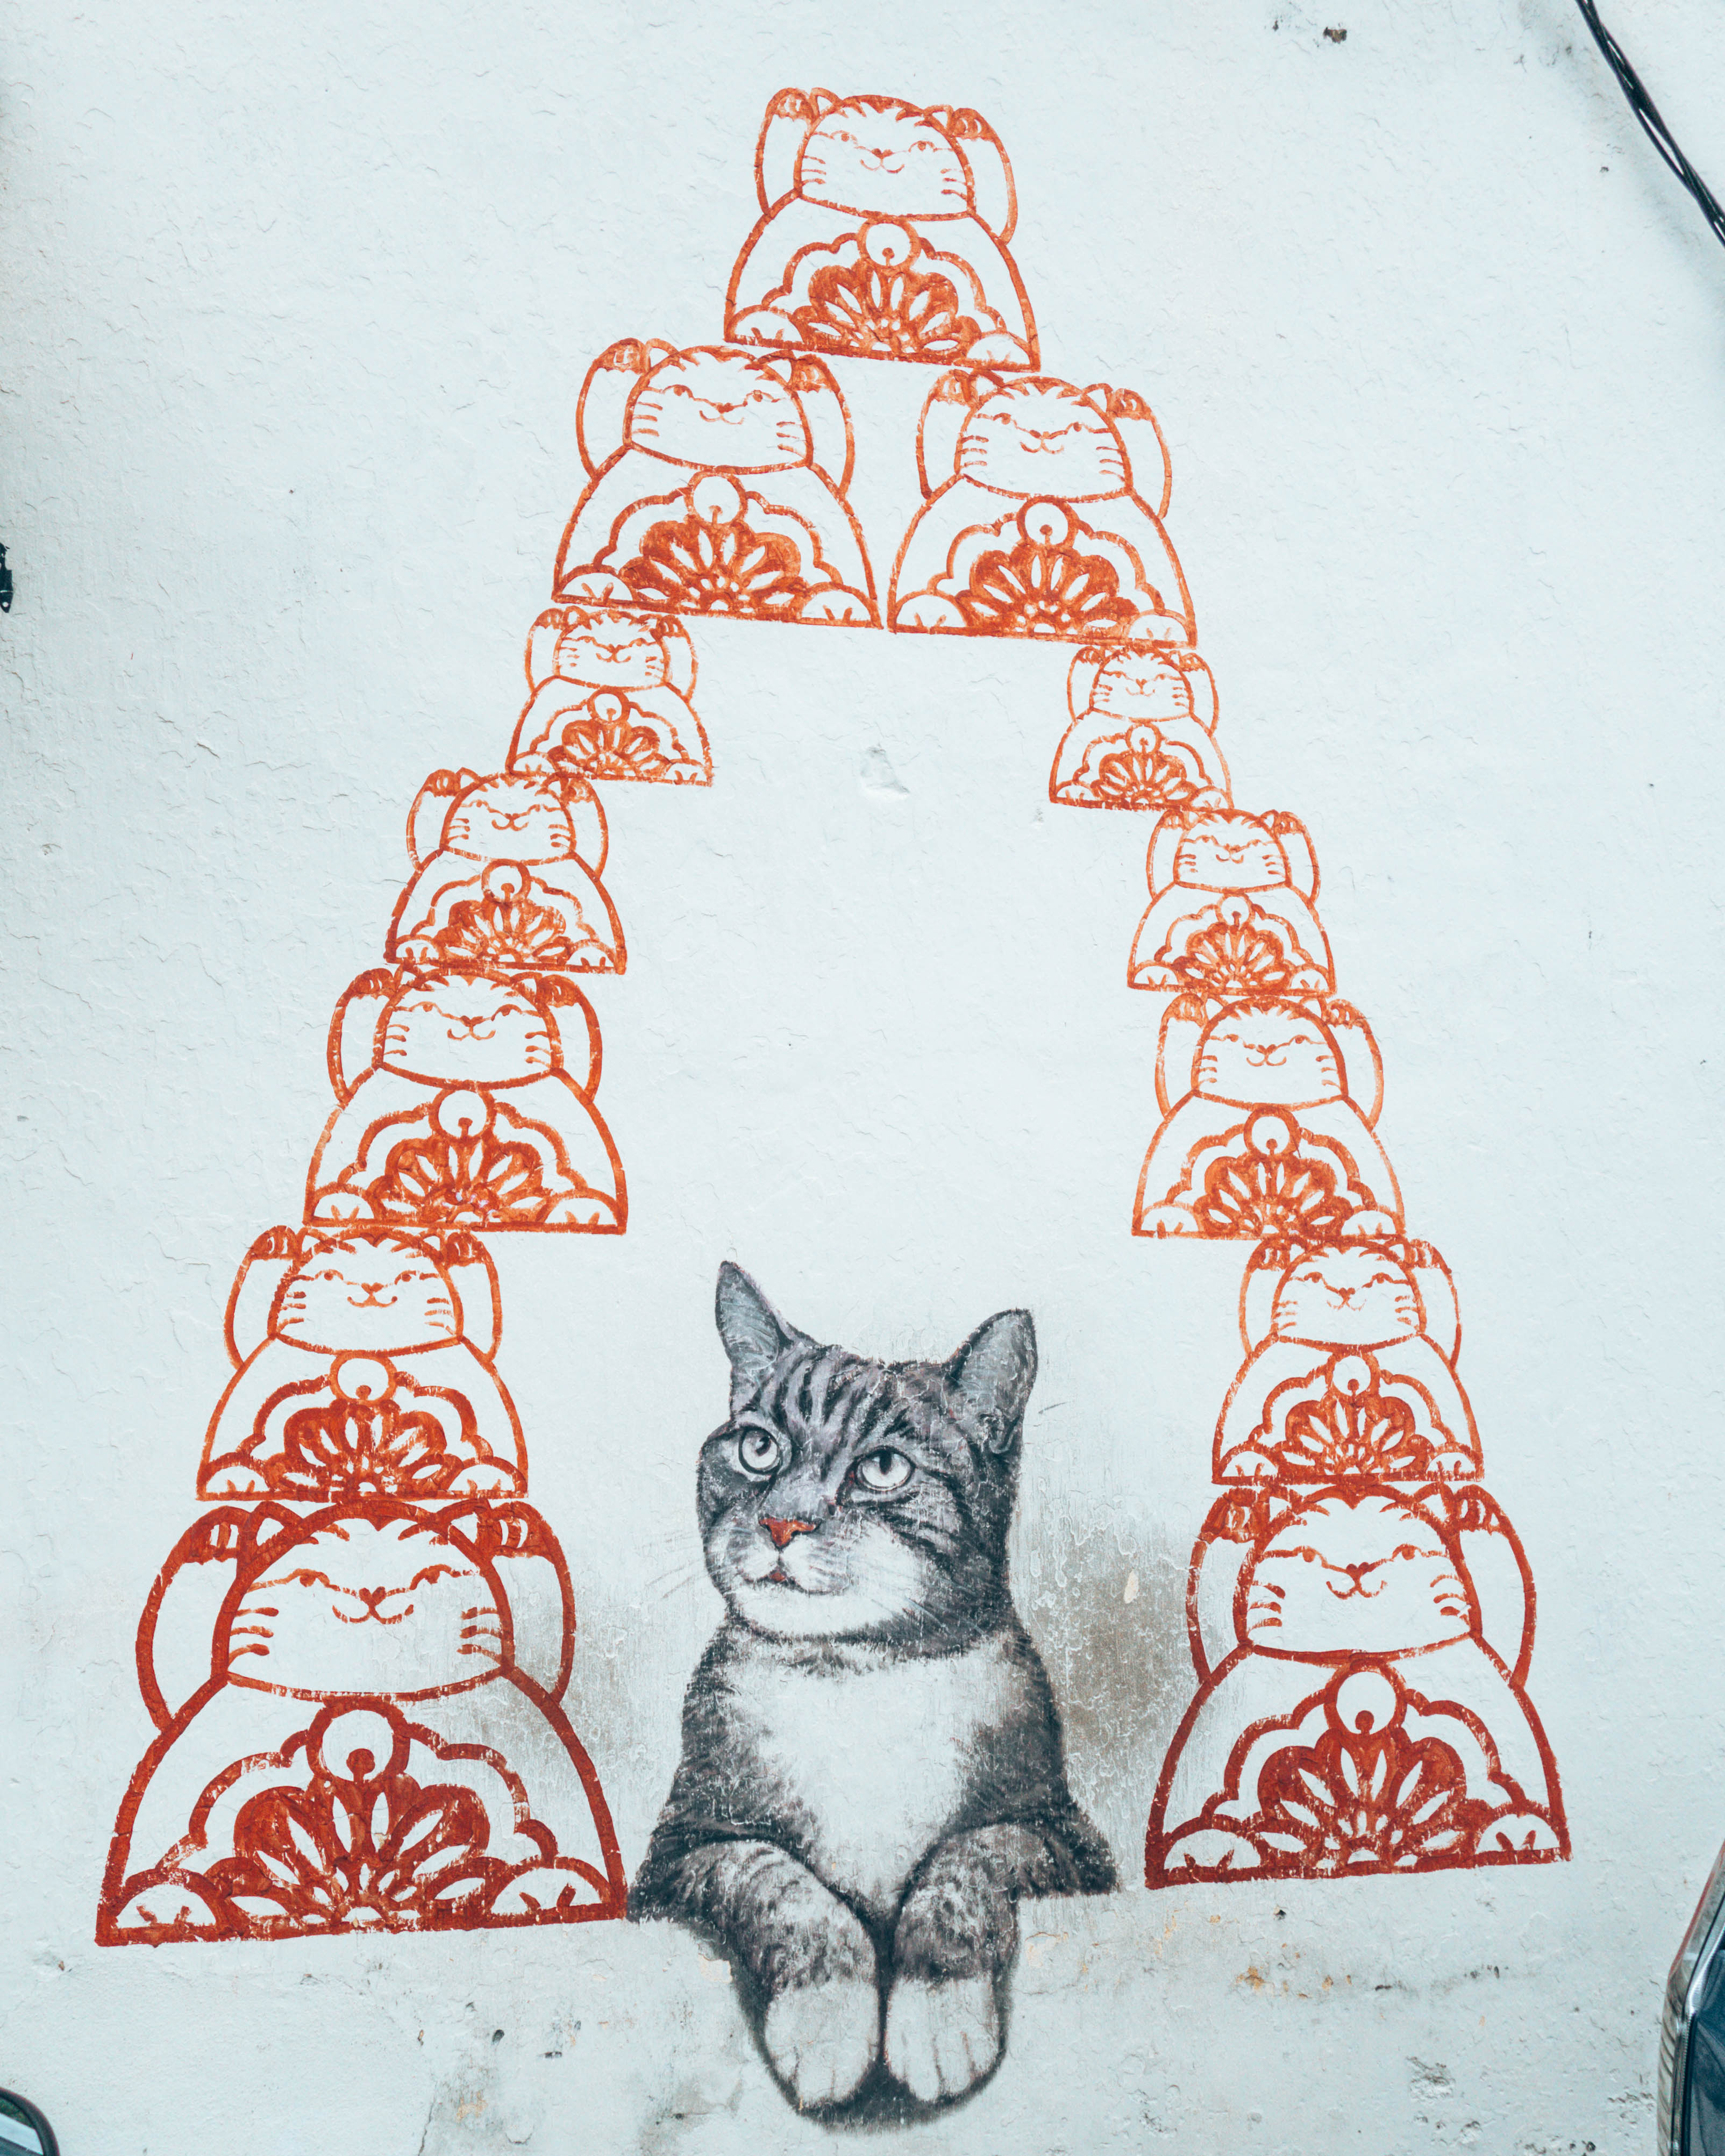 Artists for stray animals. Street art in Penang, Georgetown, Malaysia - Wediditourway.com